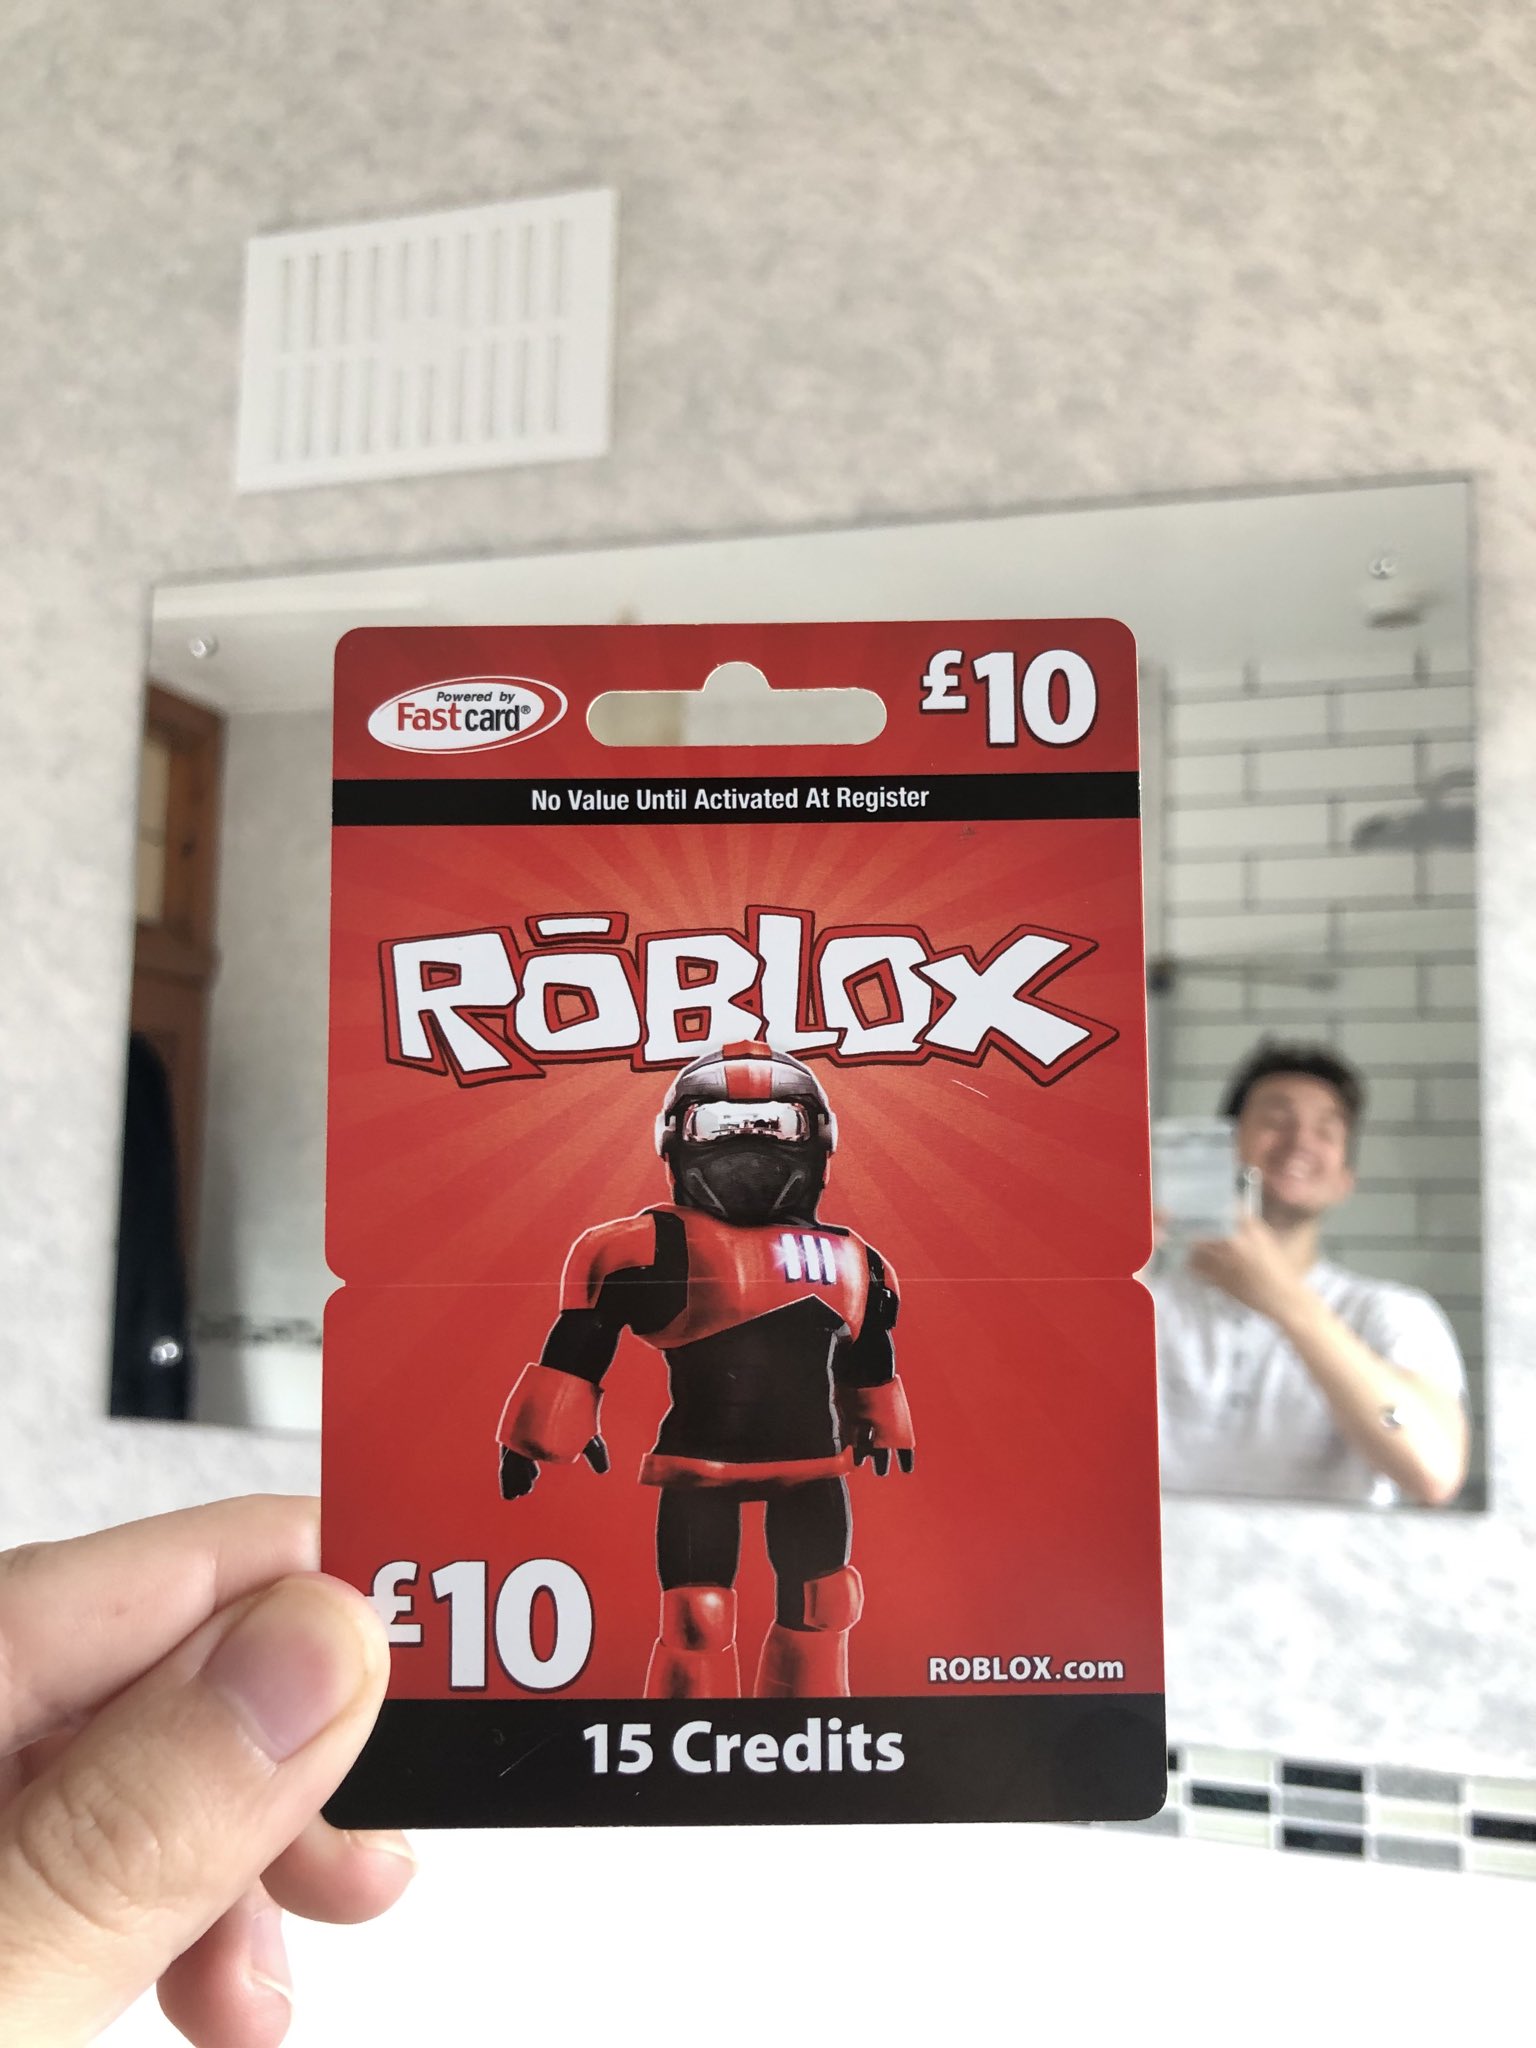 Simon on X: Just picked up some fresh Roblox cards from the store